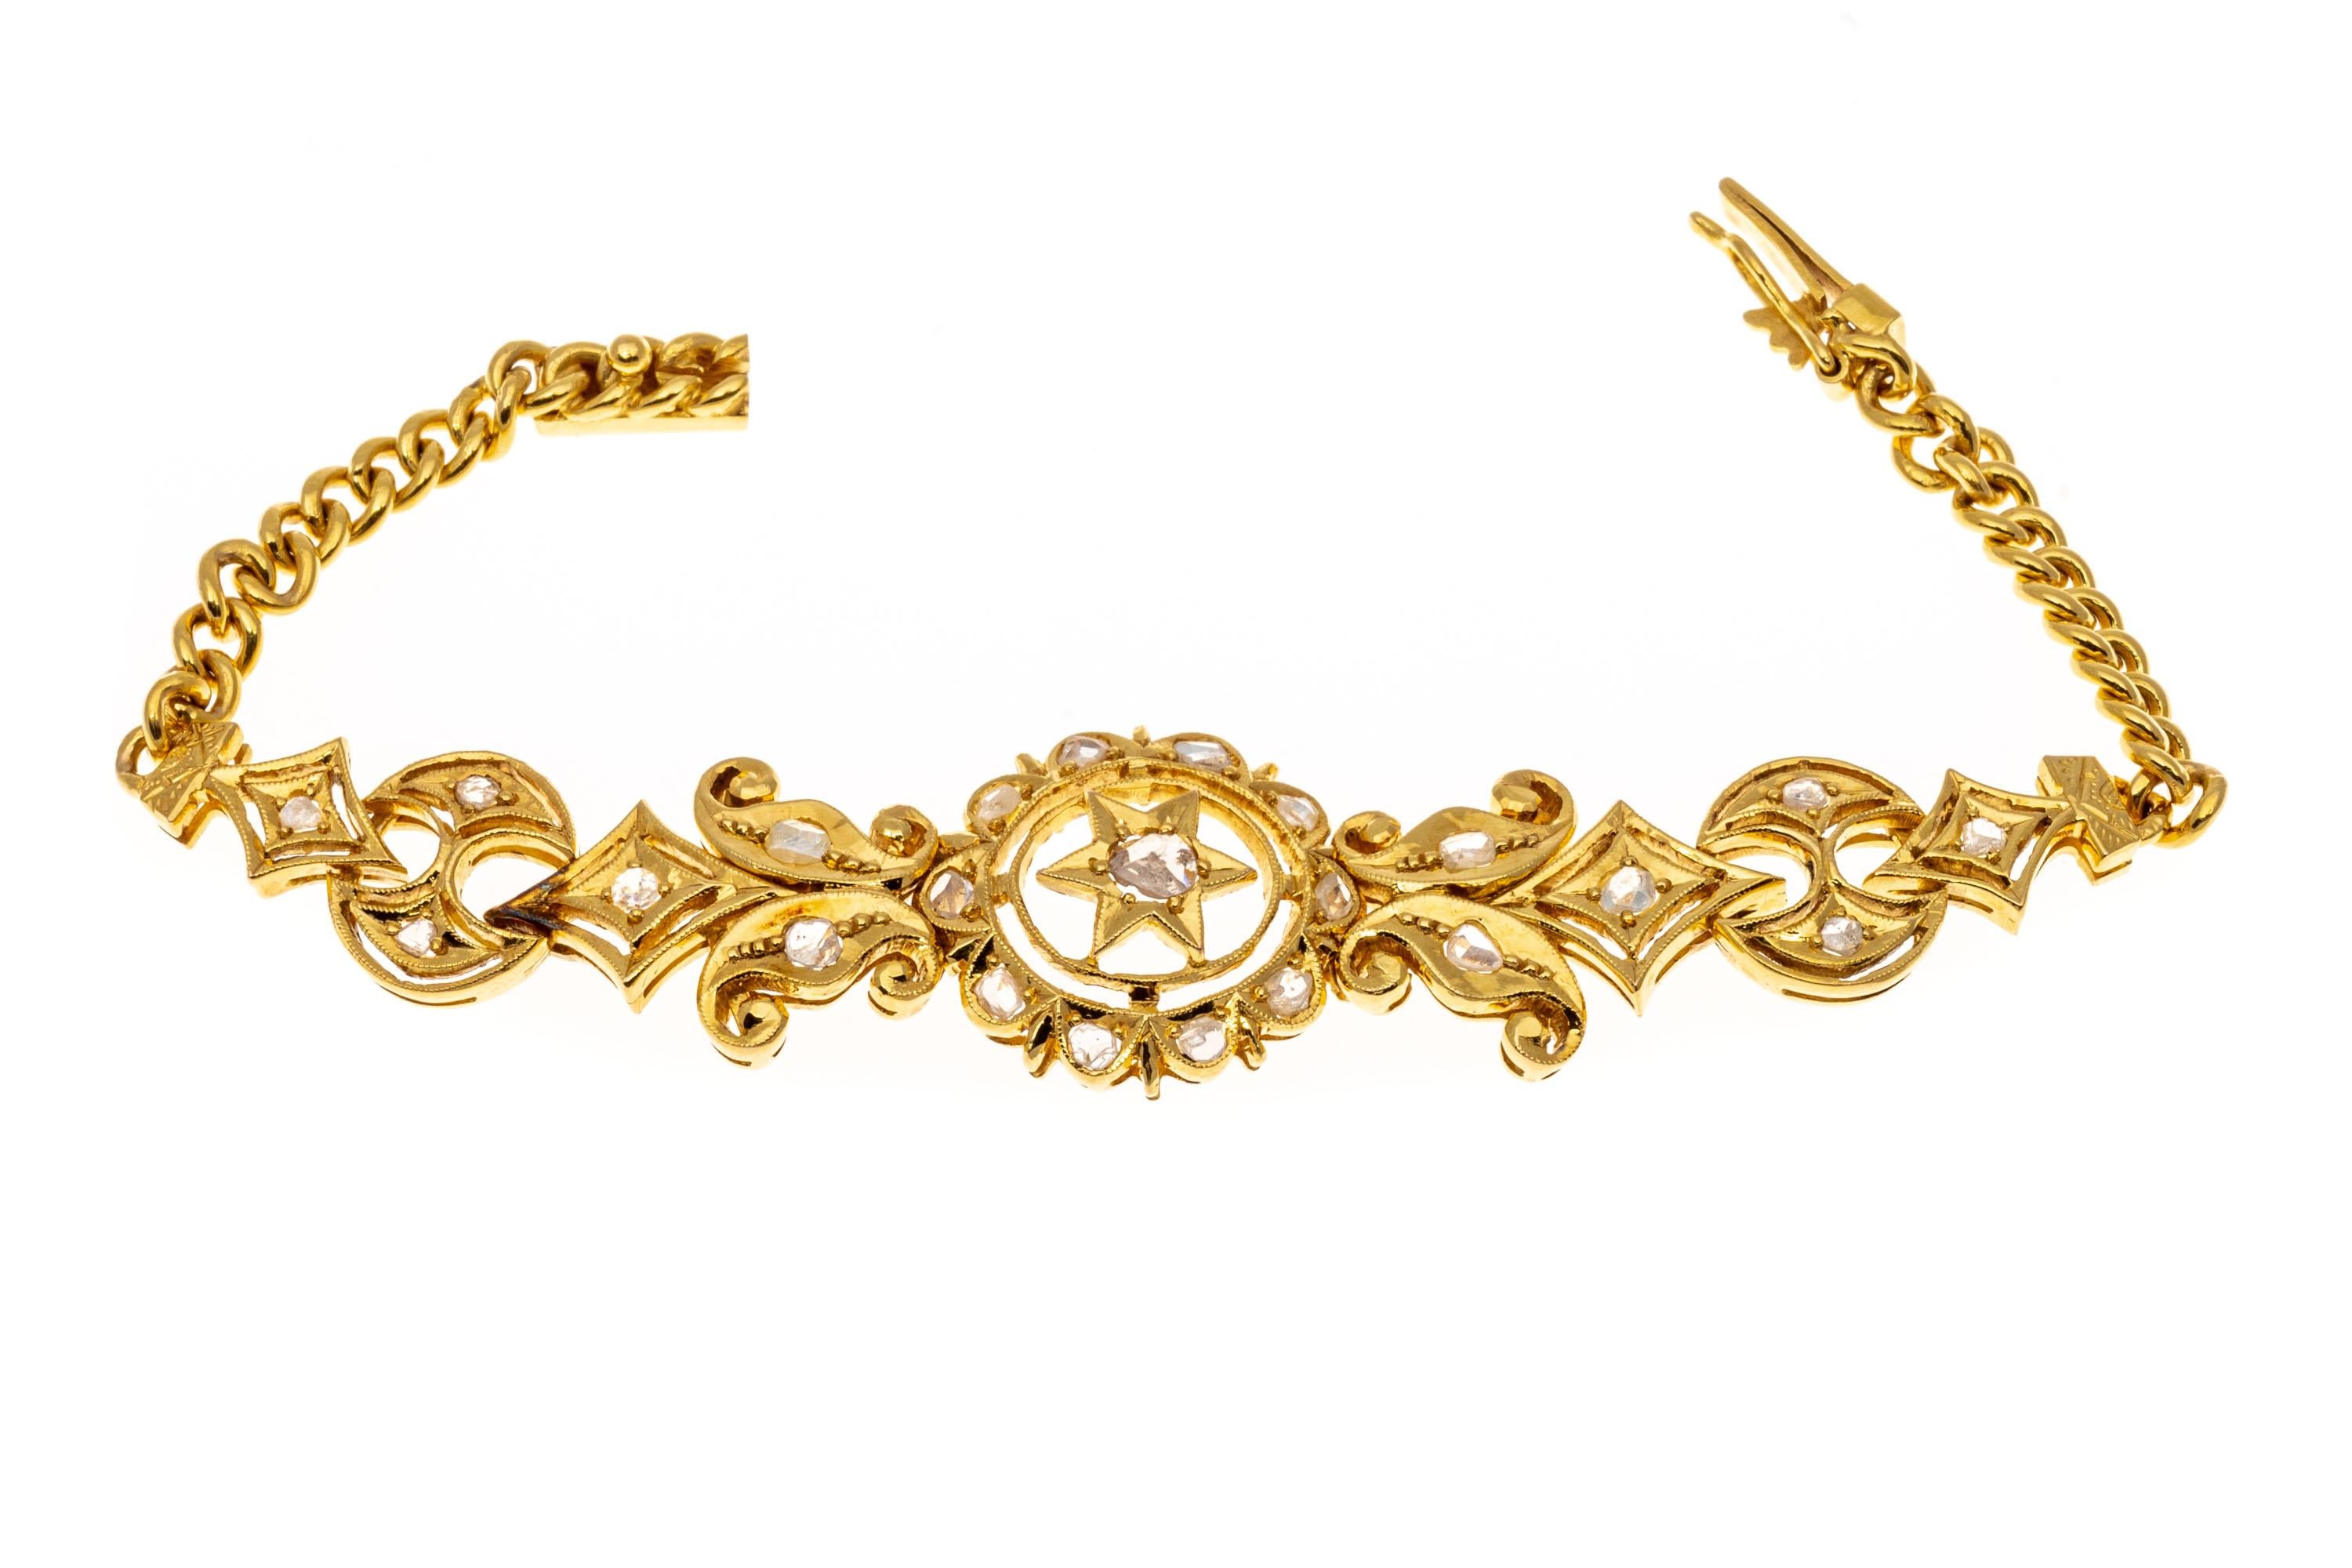 18k yellow gold bracelet. This eye-catching bracelet is a plaque style, with a diamond cut filigree placque set with macle cut diamonds. The plaque is held by a curb link style chain, which has a hidden box style clasp with a figure eight